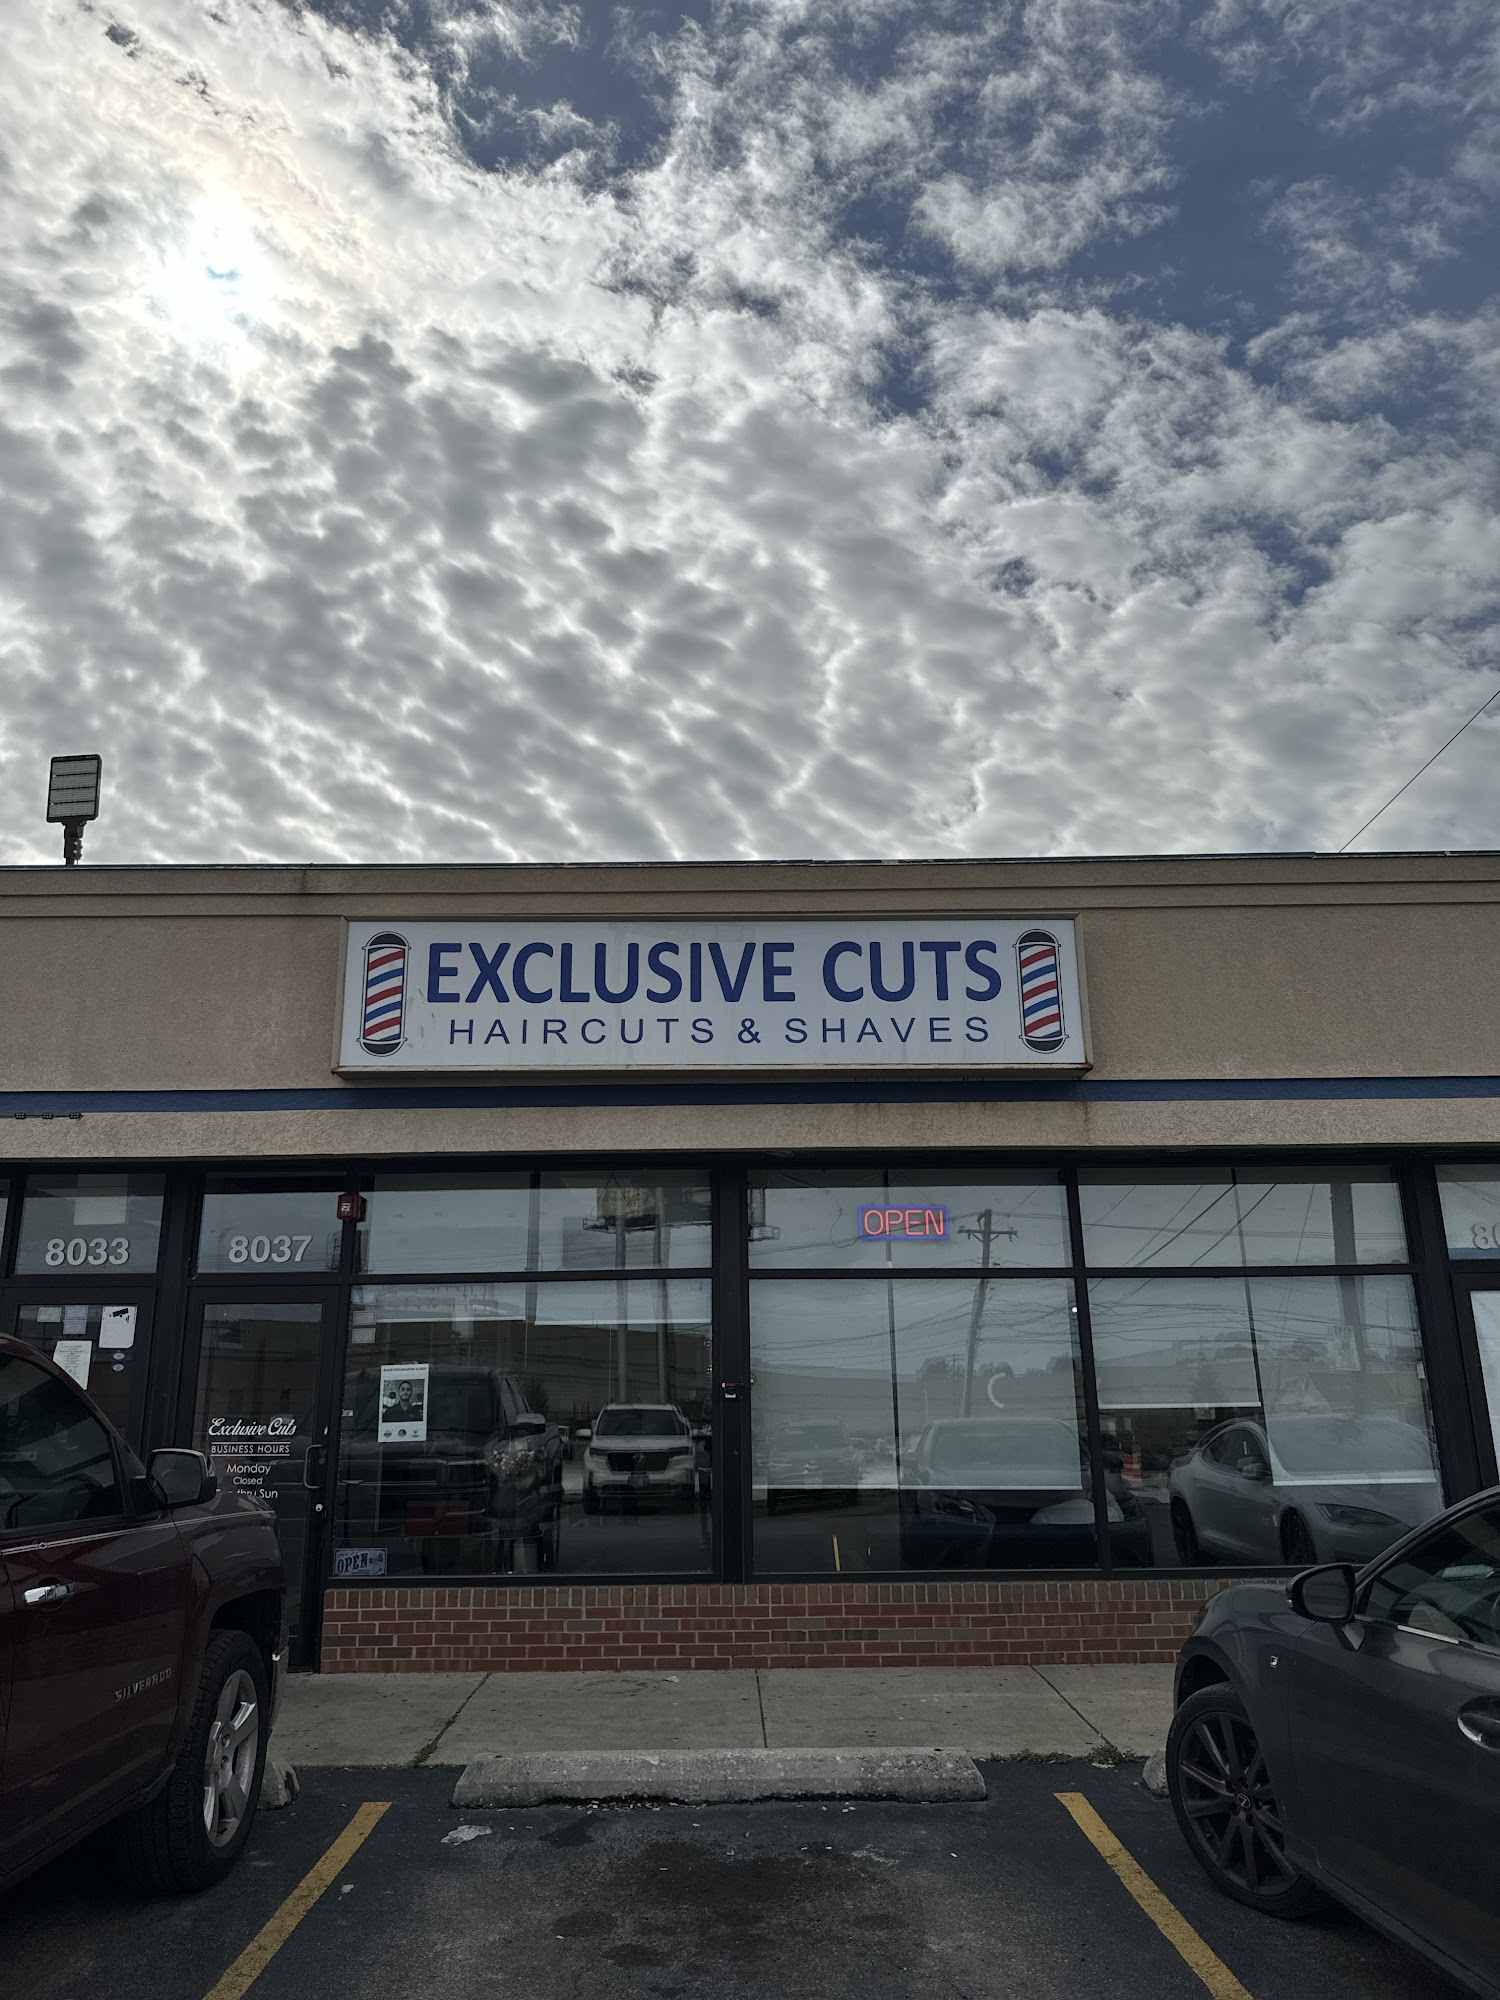 Exclusive Cuts 8039 W 87th St, Hickory Hills Illinois 60457